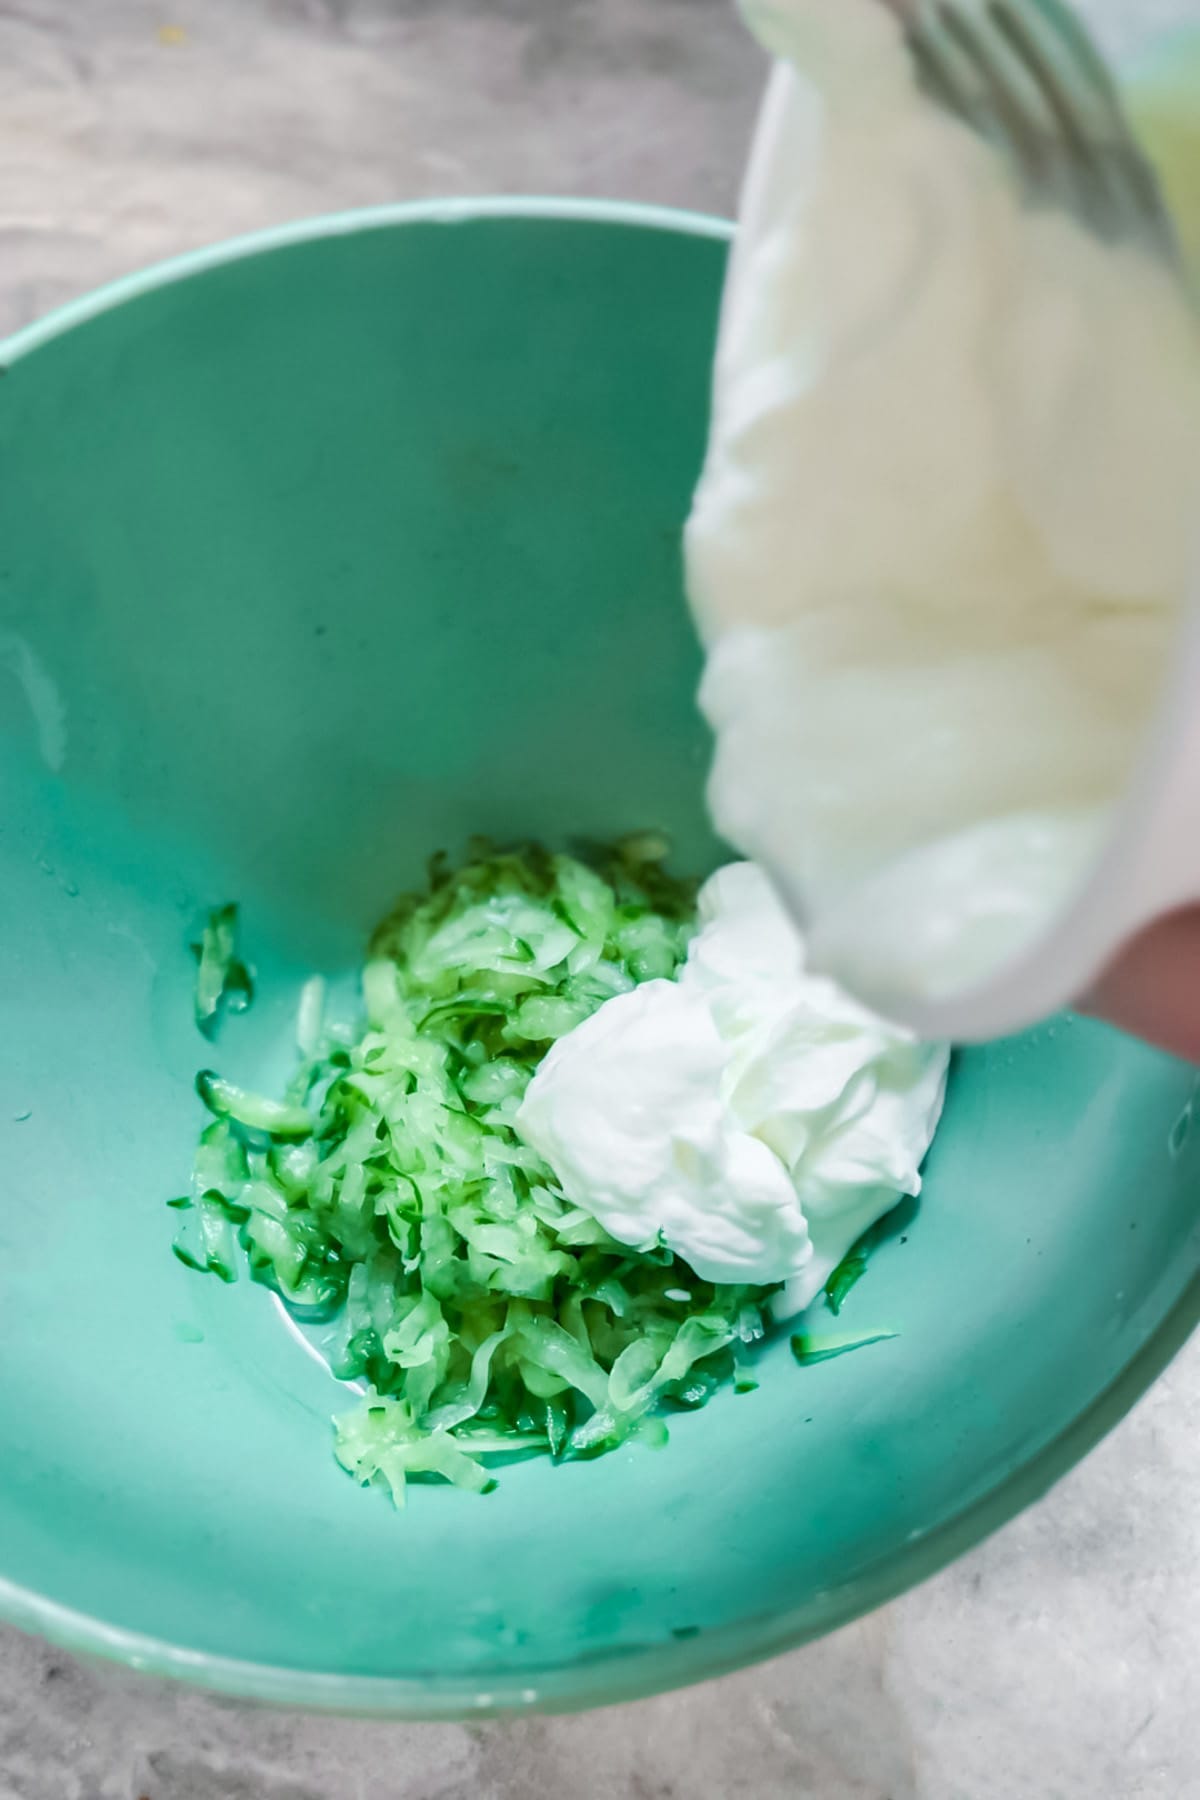 Step by step photos of how to make tzatziki sauce: Adding the yogurt to the cucumber. 